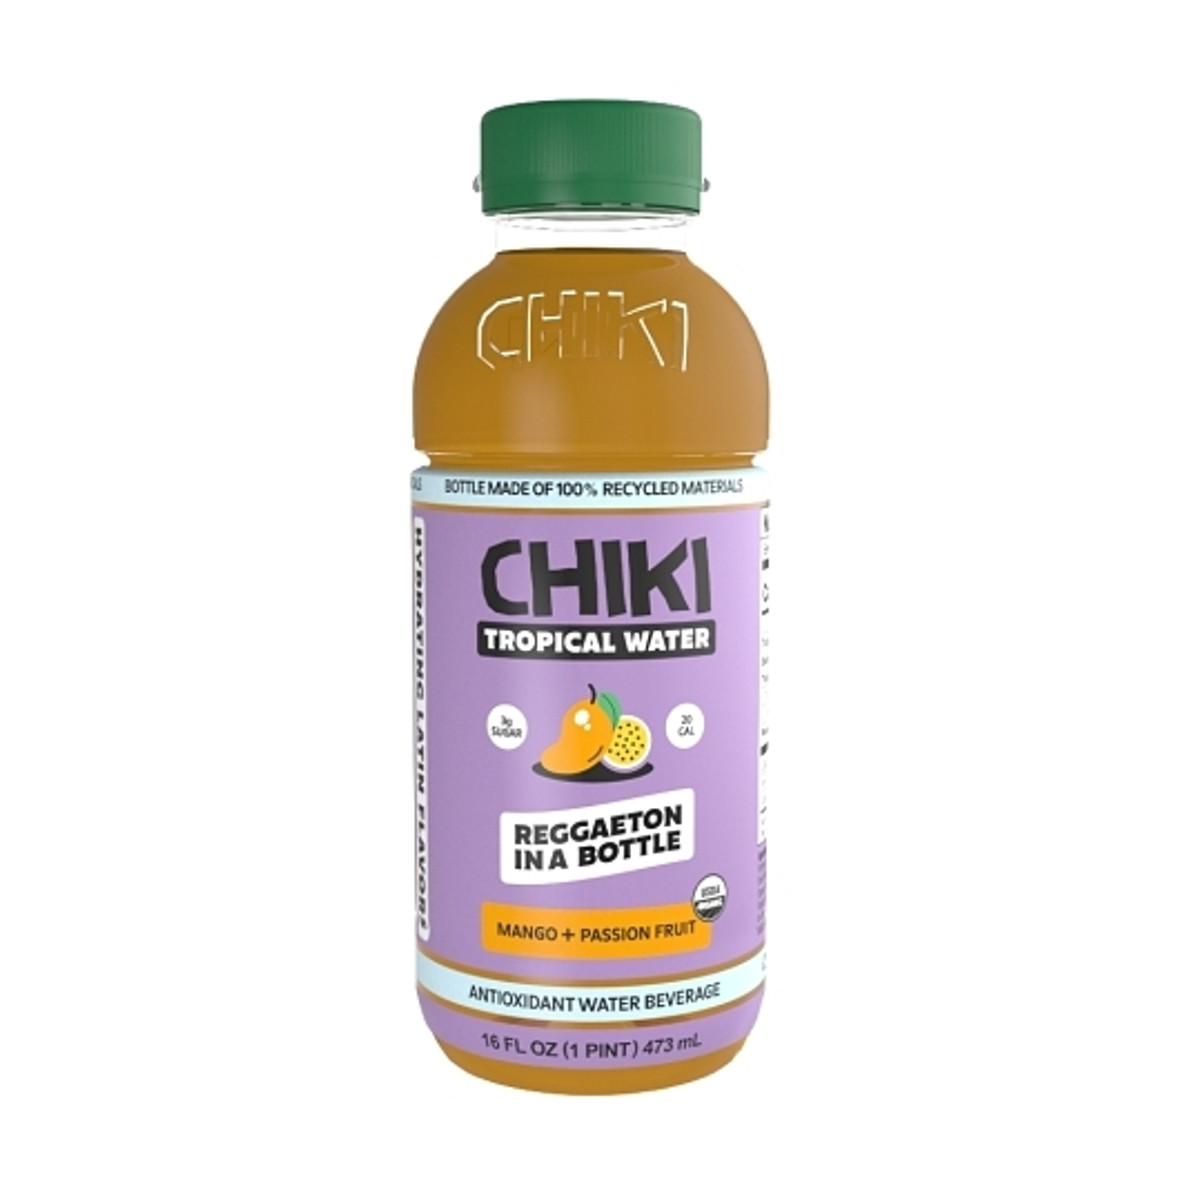 Chiki Chiki Boom Boom Mango Passion Fruit Chiki Organic Tropical Water Case, 16 Fluid Ounce, 12 Per Case